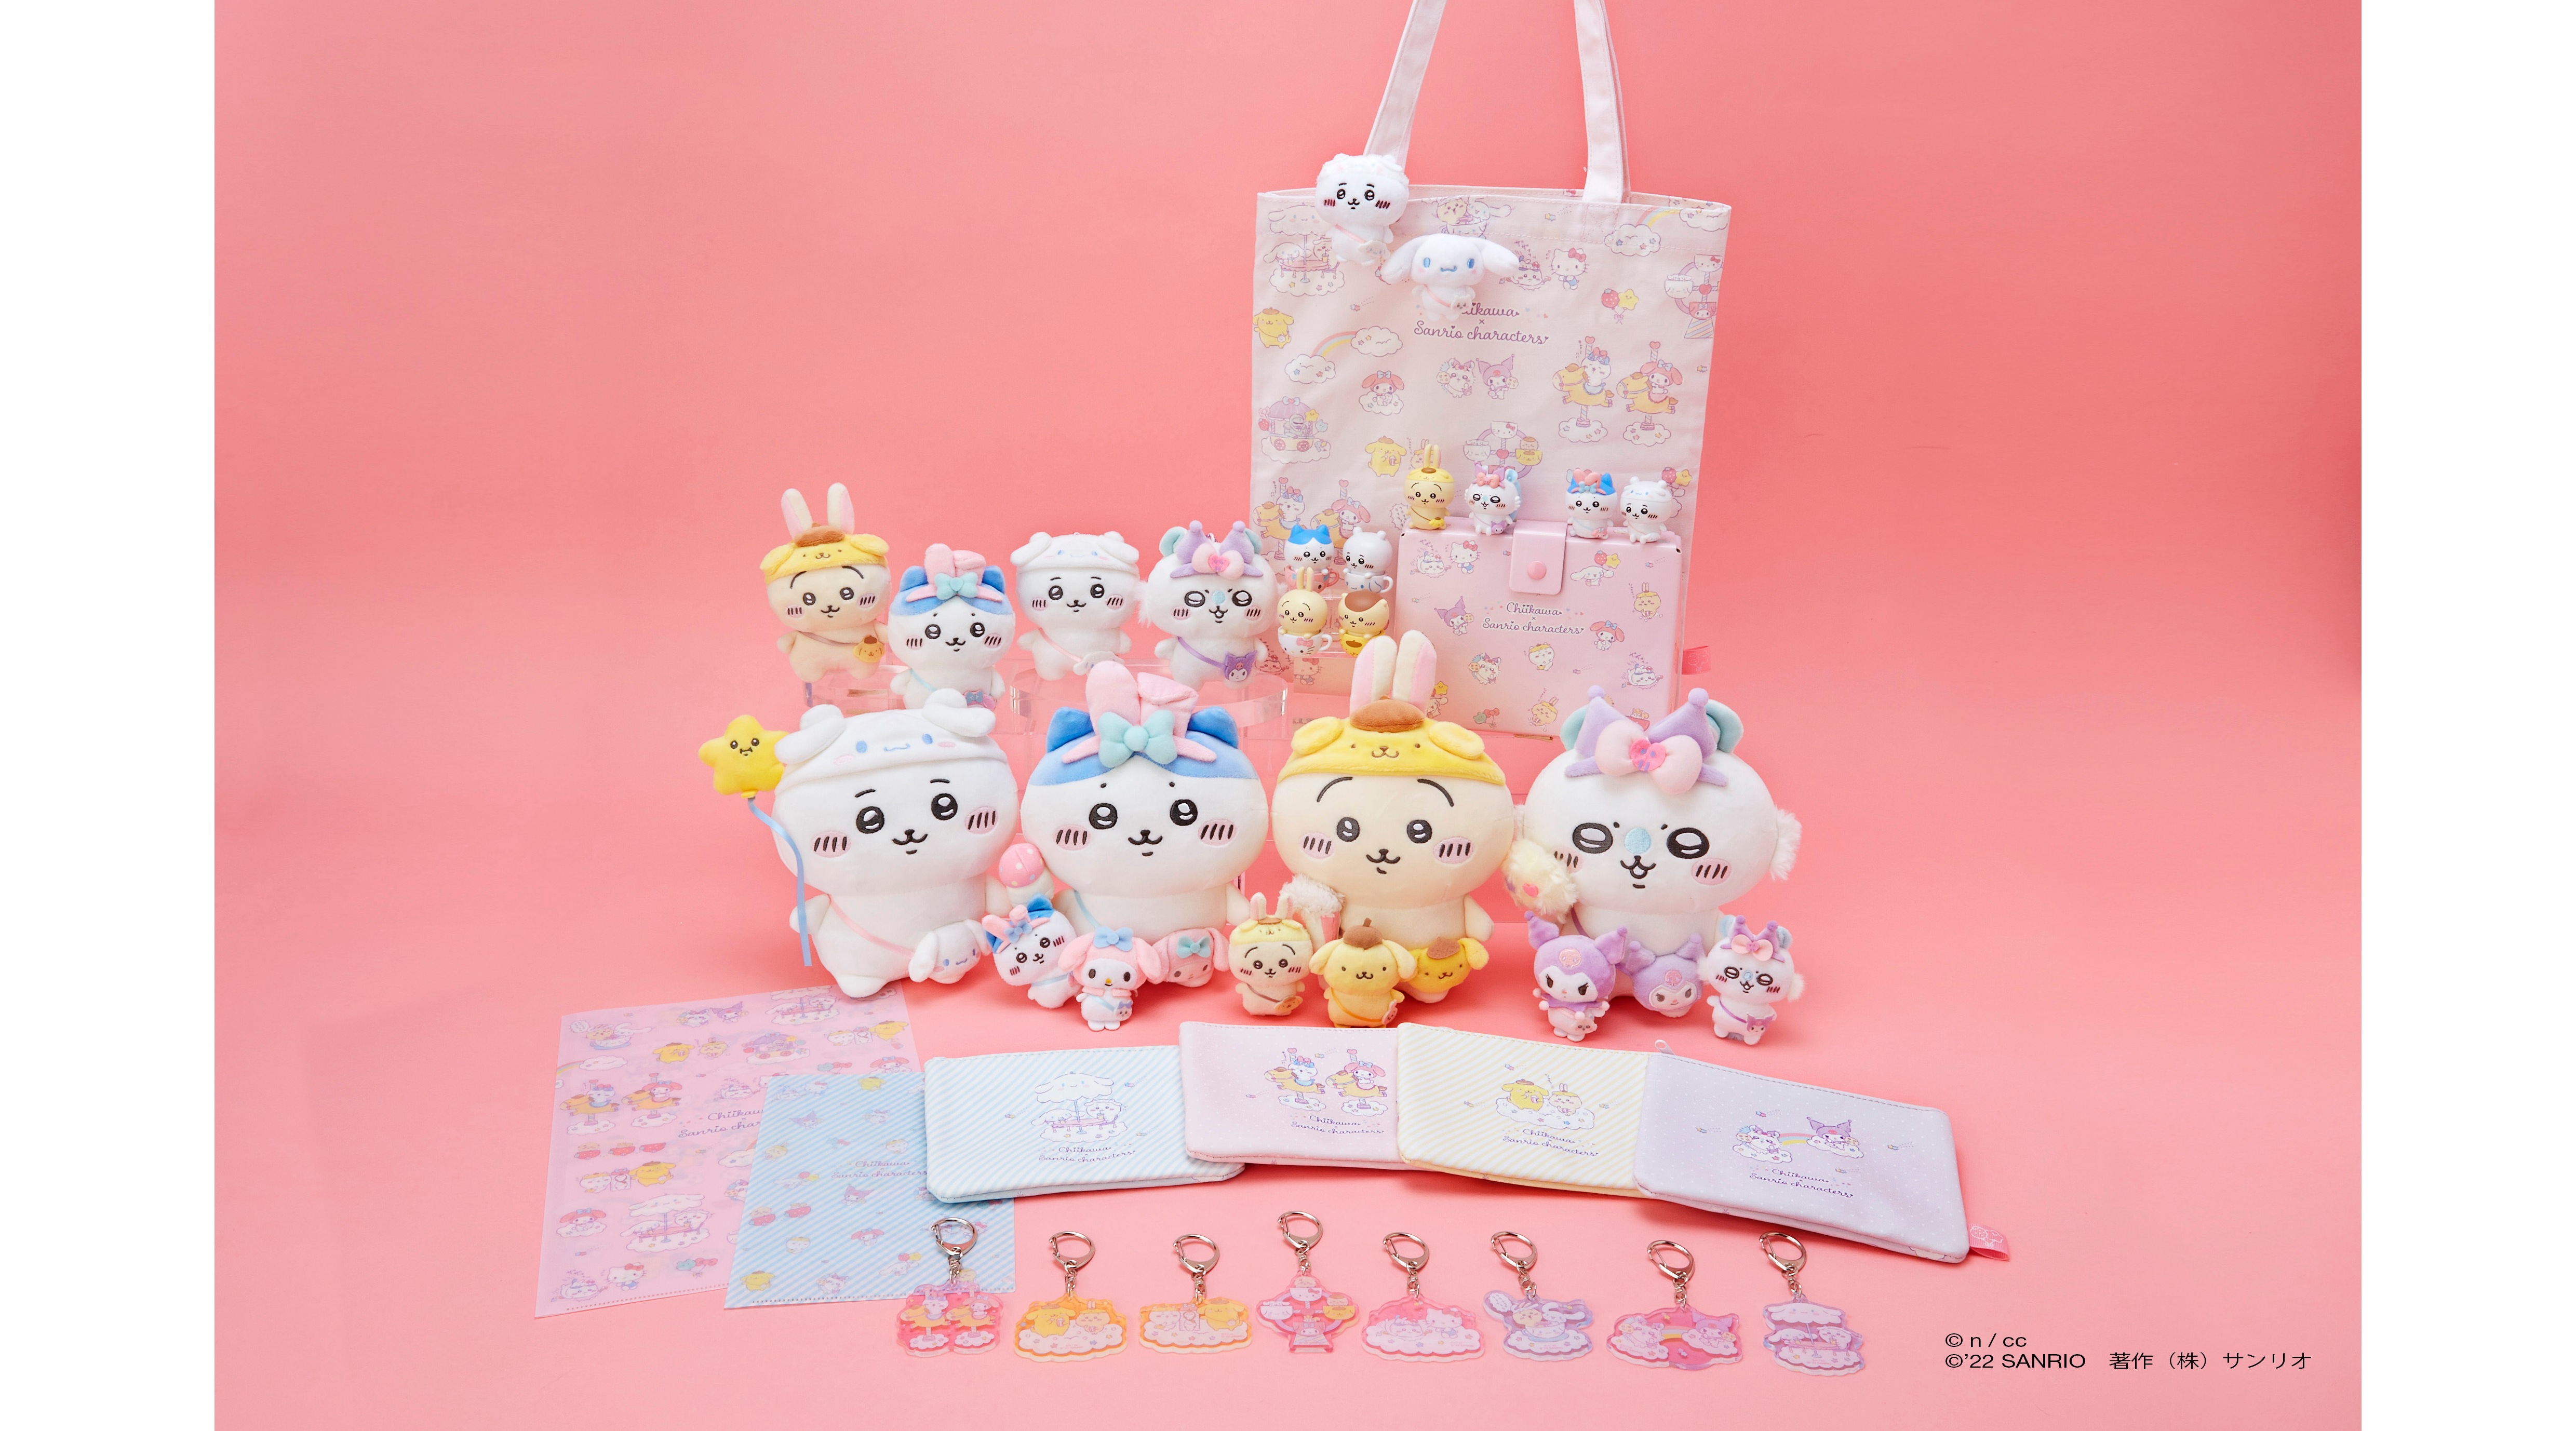 Toranoana opens collaborative shop with Sanrio characters in Tokyo - Inside  Retail Asia